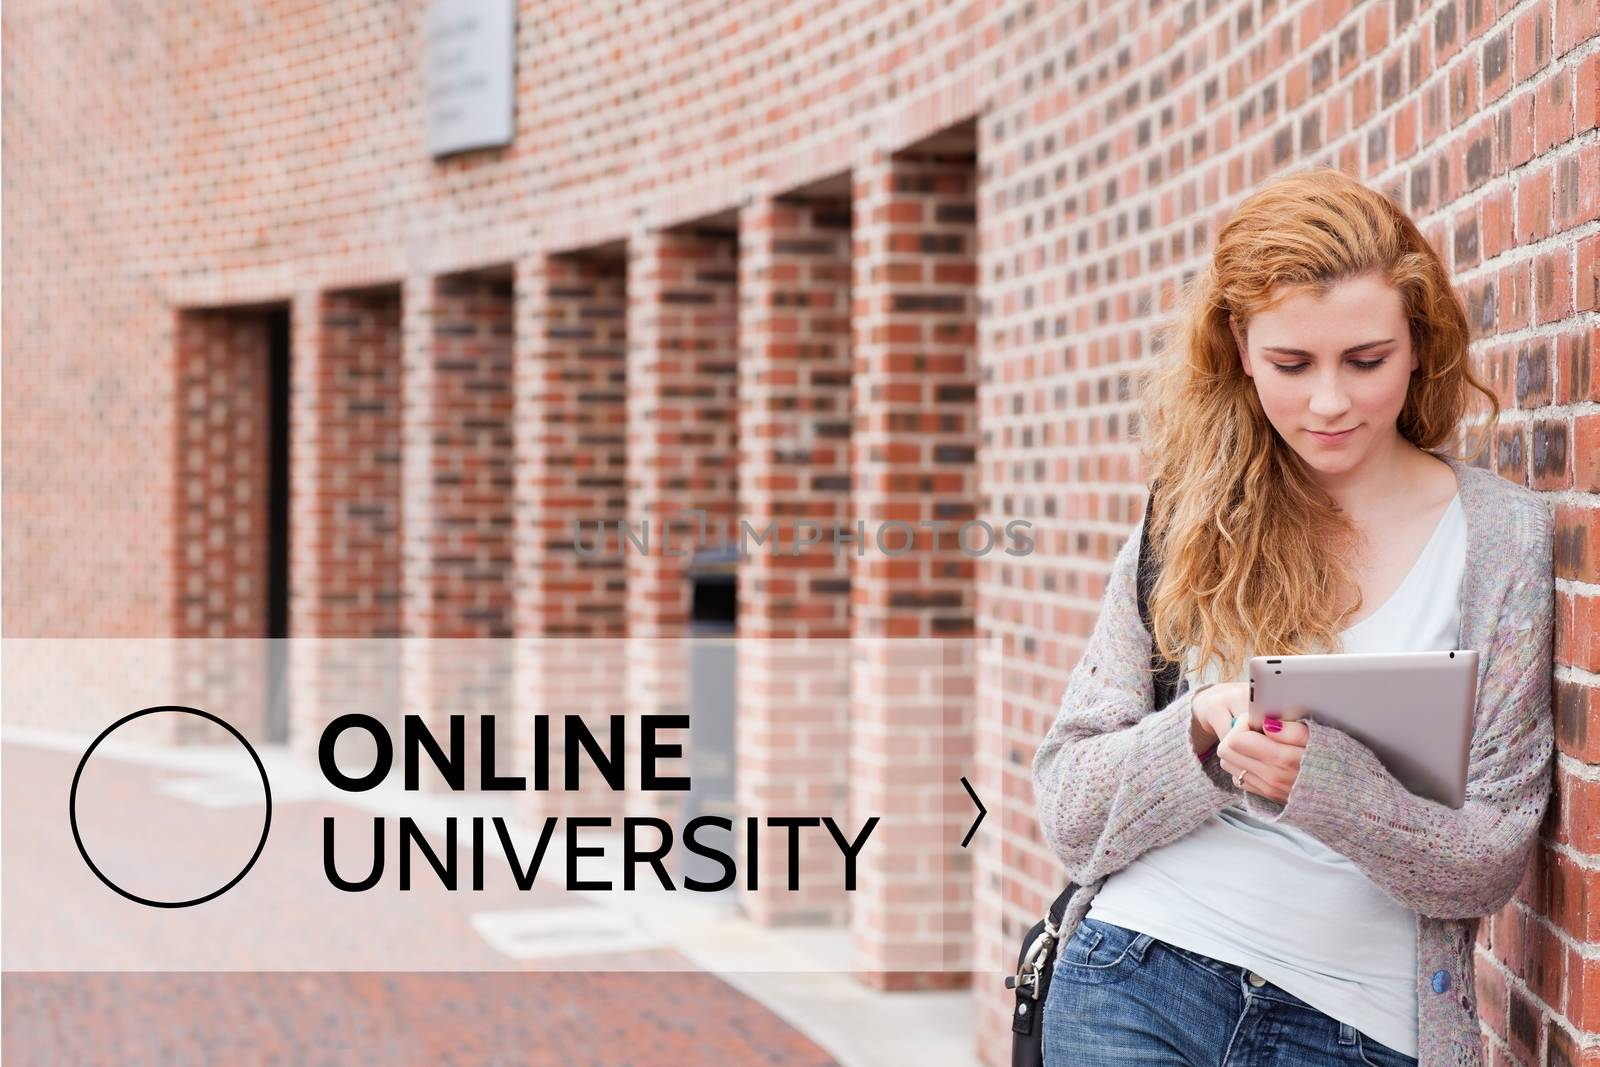 Education and online university text and woman looking at a tablet by Wavebreakmedia